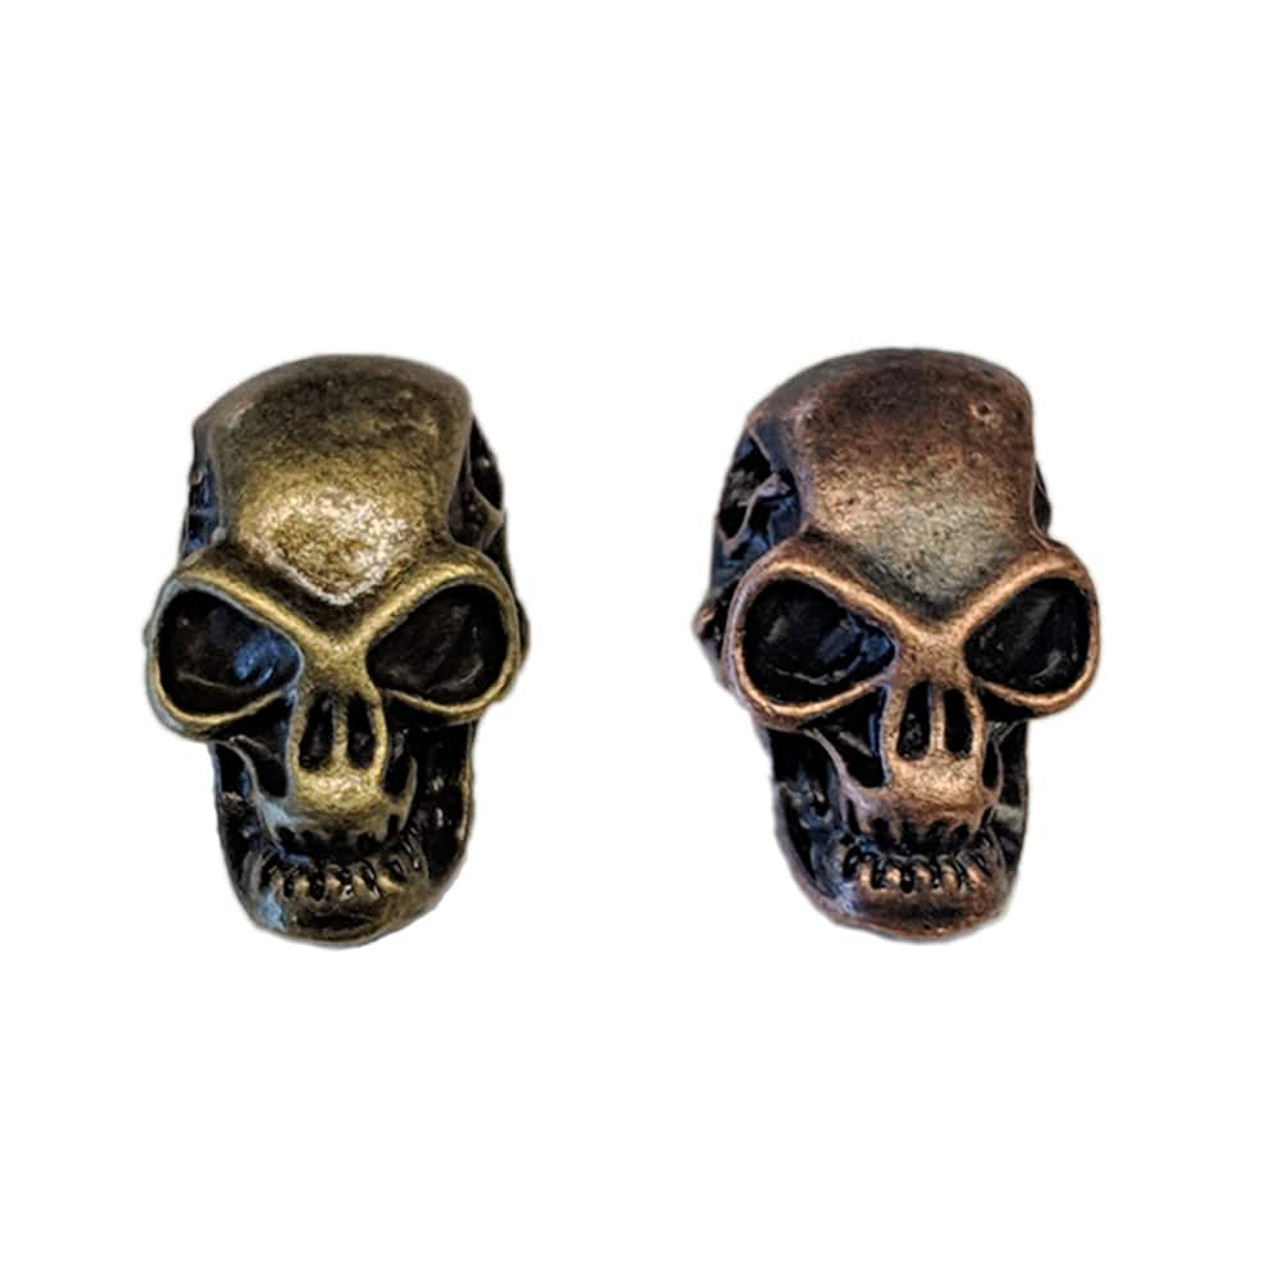 Dark anatomical human skull paracord beads - Paracord skull beads of  bronze. Big, heavy beads for your lanyards! 35984 in online supermarket